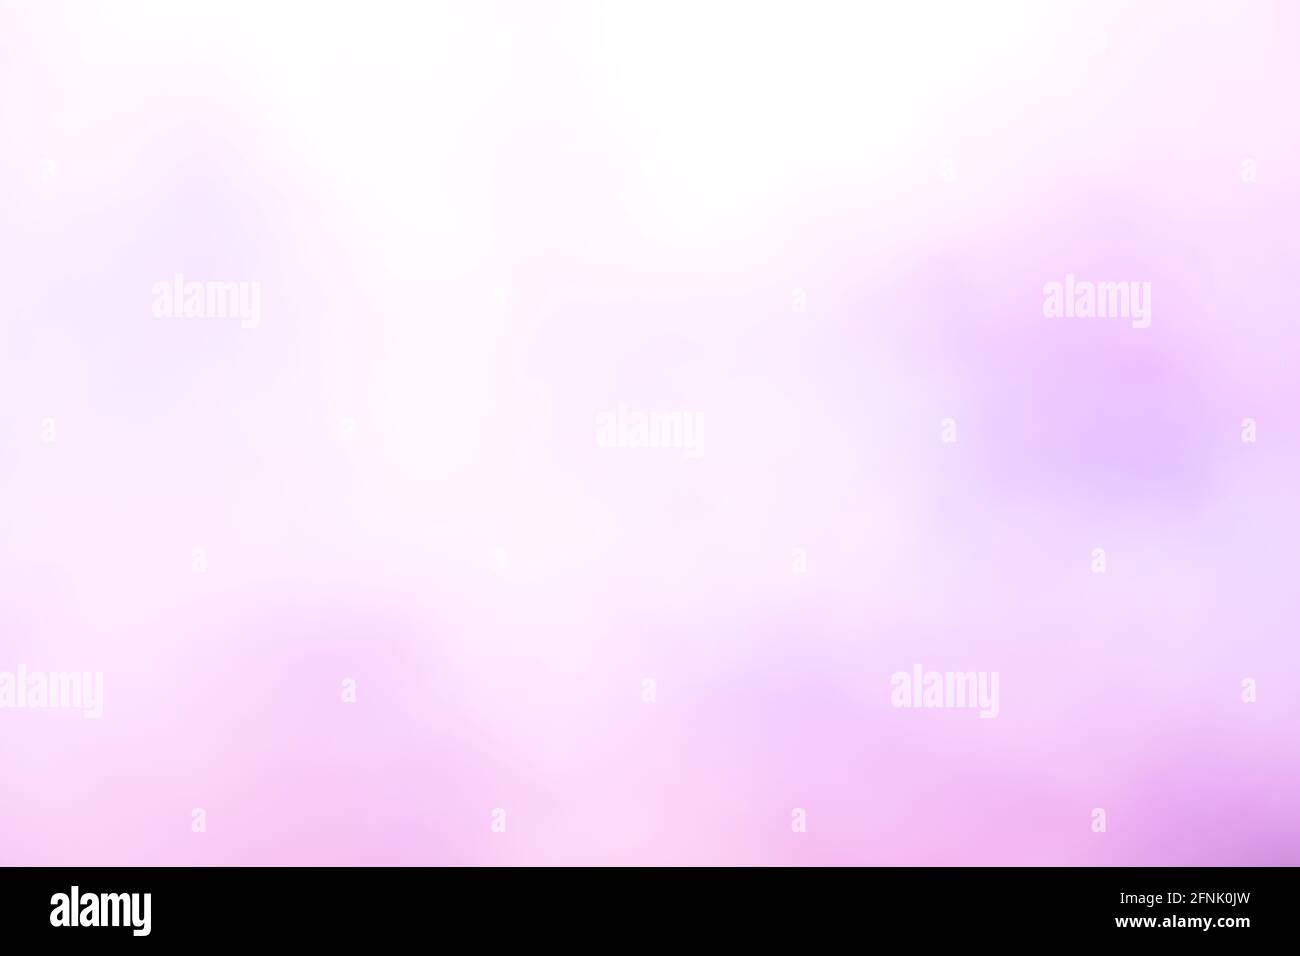 gradient purple background for wallpapers and graphic designs, blurred  abstract purple gradient pastel light background smart blurred pattern.  Abstrac Stock Photo - Alamy